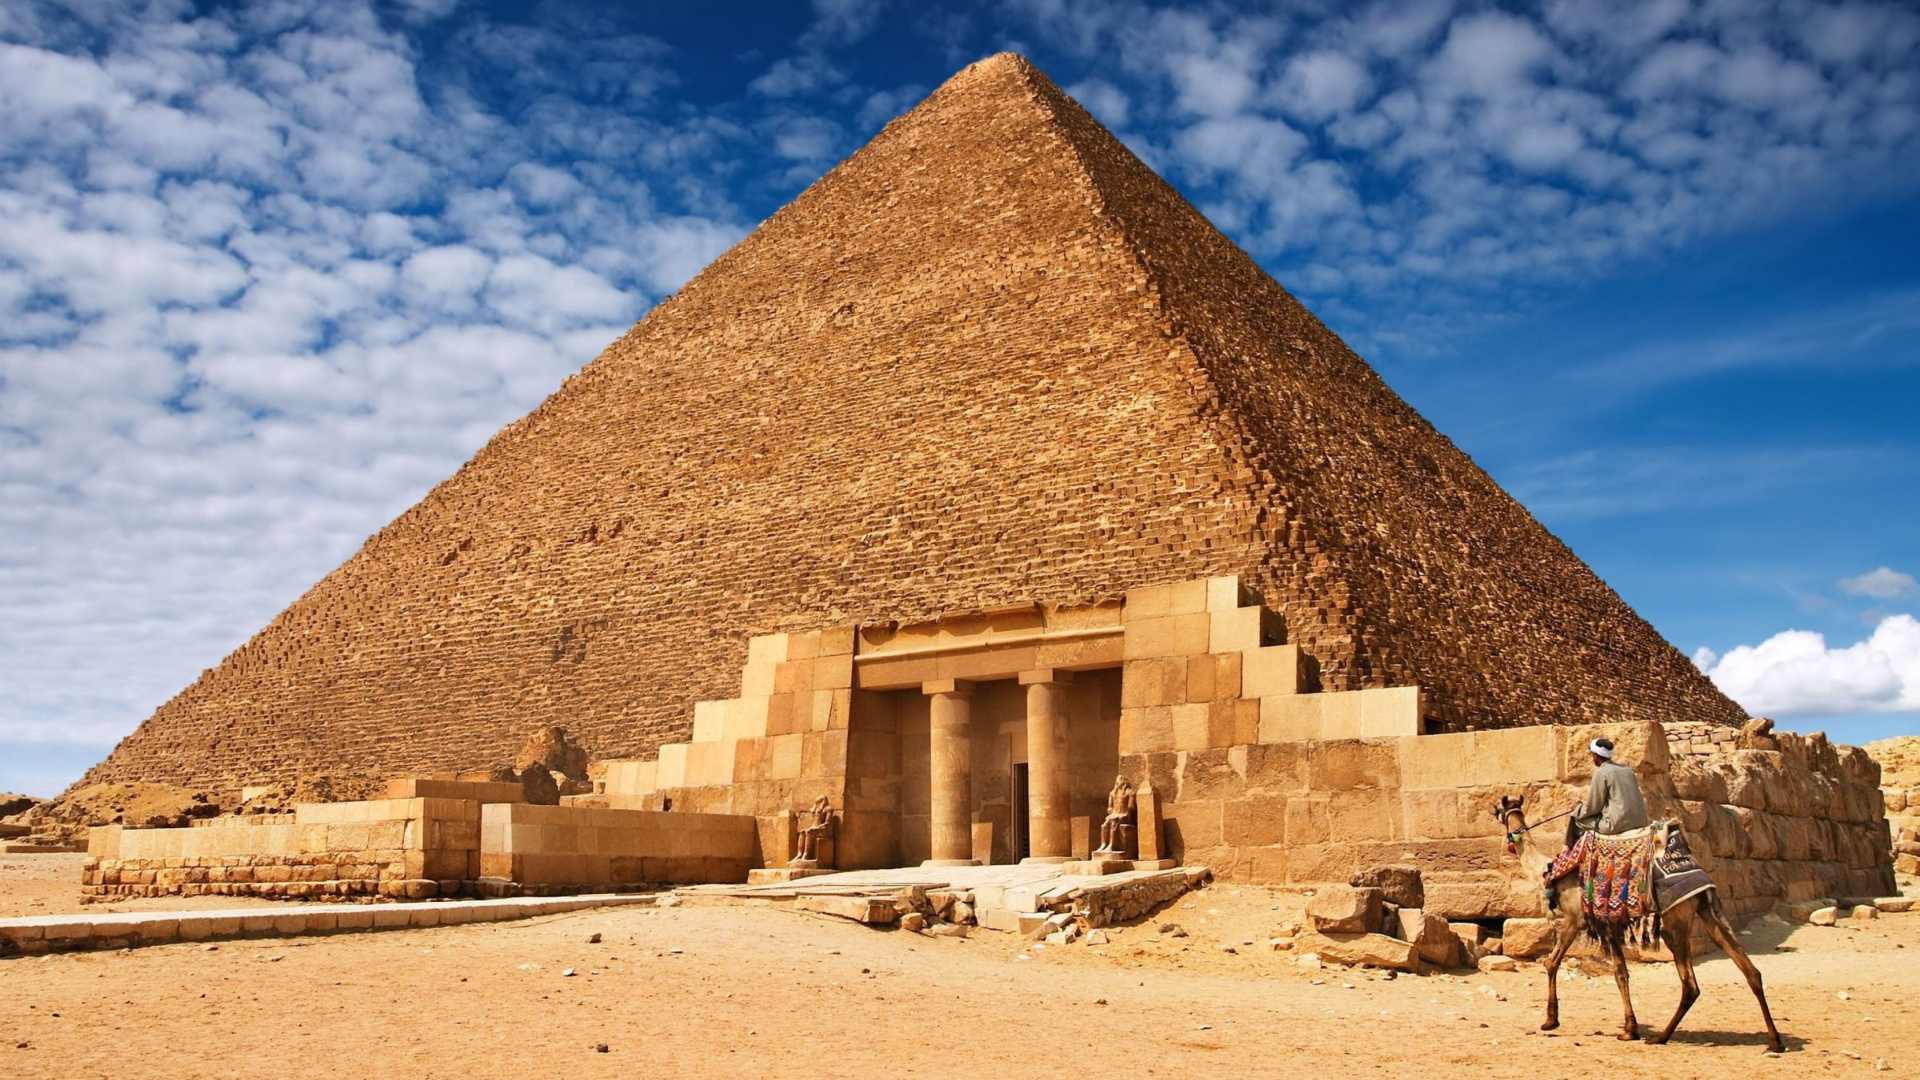 Great Pyramid of Giza in Egypt wallpaper 1920x1080